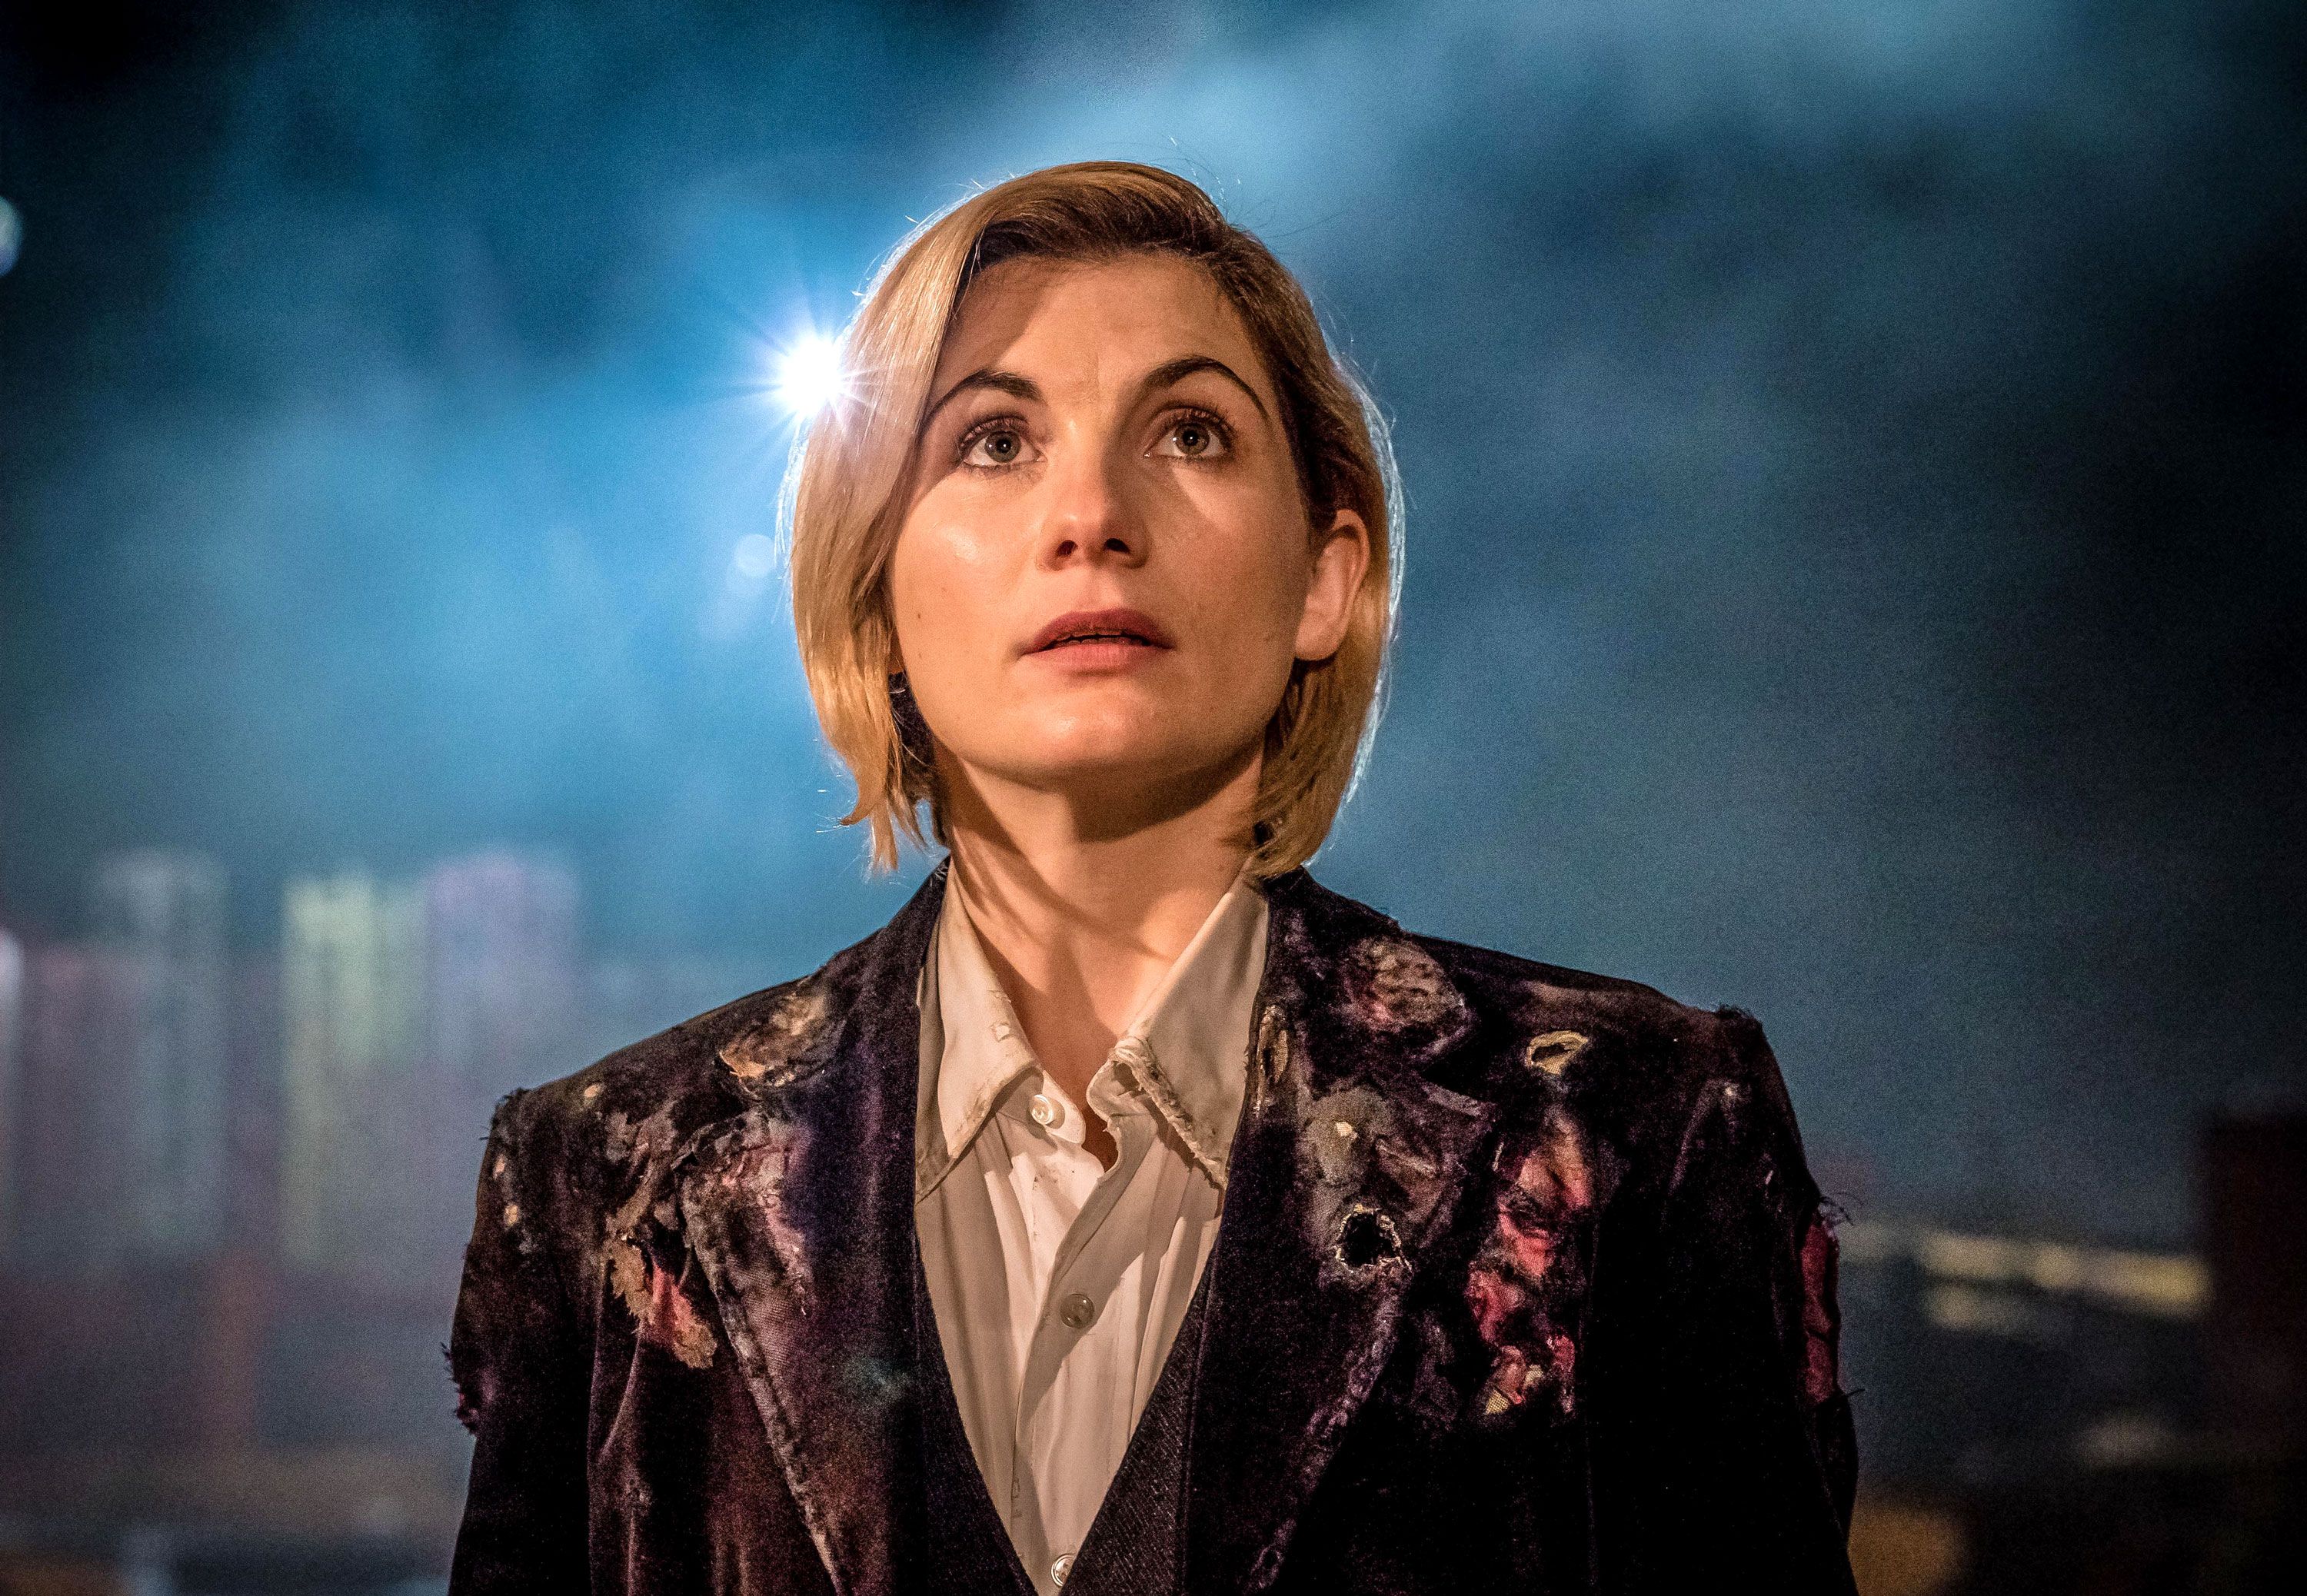 Doctor Who: The Complete Eleventh Series: : Jodie